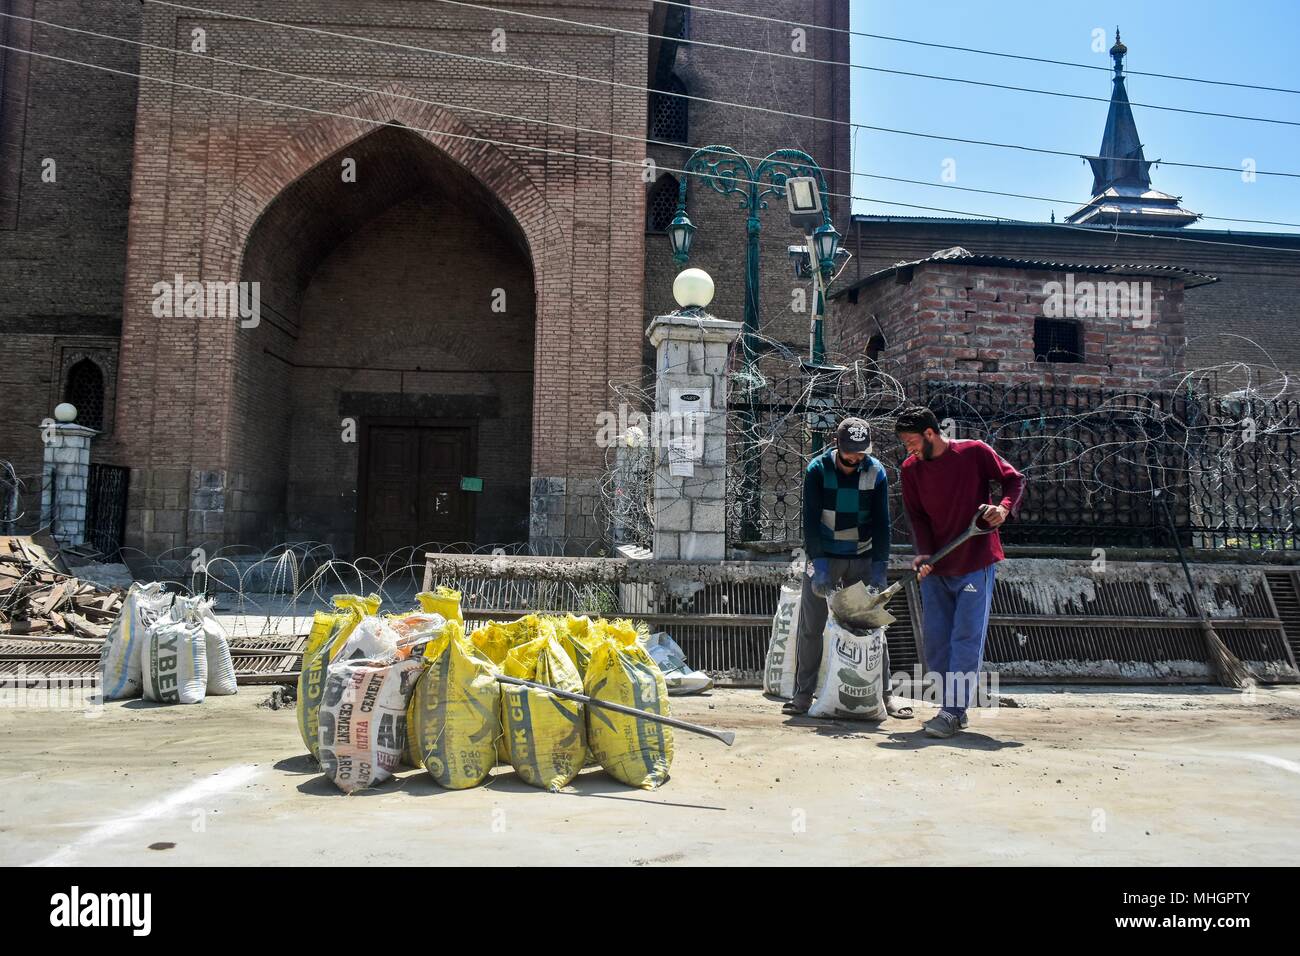 May 1, 2018 - Srinagar, J&K, India - Laborers work at a construction site on the eve of International Labor Day in Srinagar, Indian administered Kashmir. International Labor Day also known as May Day is marked across the world on May 1.The International Labor Day commemorates the historic struggle of working people throughout the world. Credit: Saqib Majeed/SOPA Images/ZUMA Wire/Alamy Live News Stock Photo